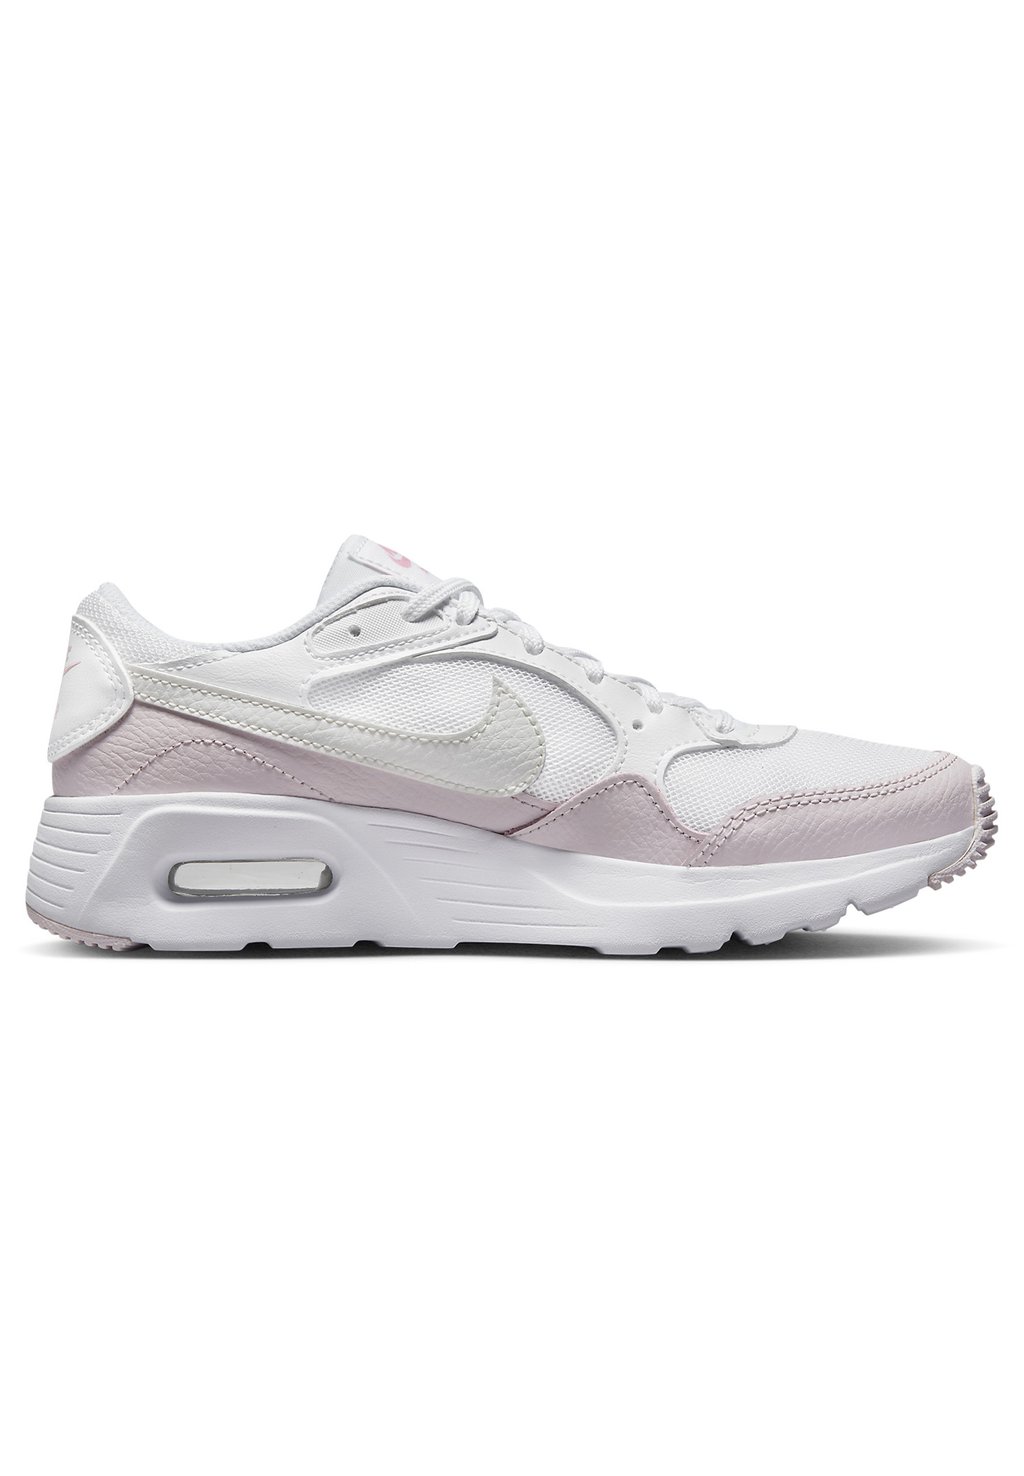 Низкие кроссовки Nike Air Max Sc (Gs) Nike, цвет white/summit white-pearl pink-med soft pink real freshwater pearl earring 925 silver wedding natural pearl earring drop women daughter birthday gift white pink